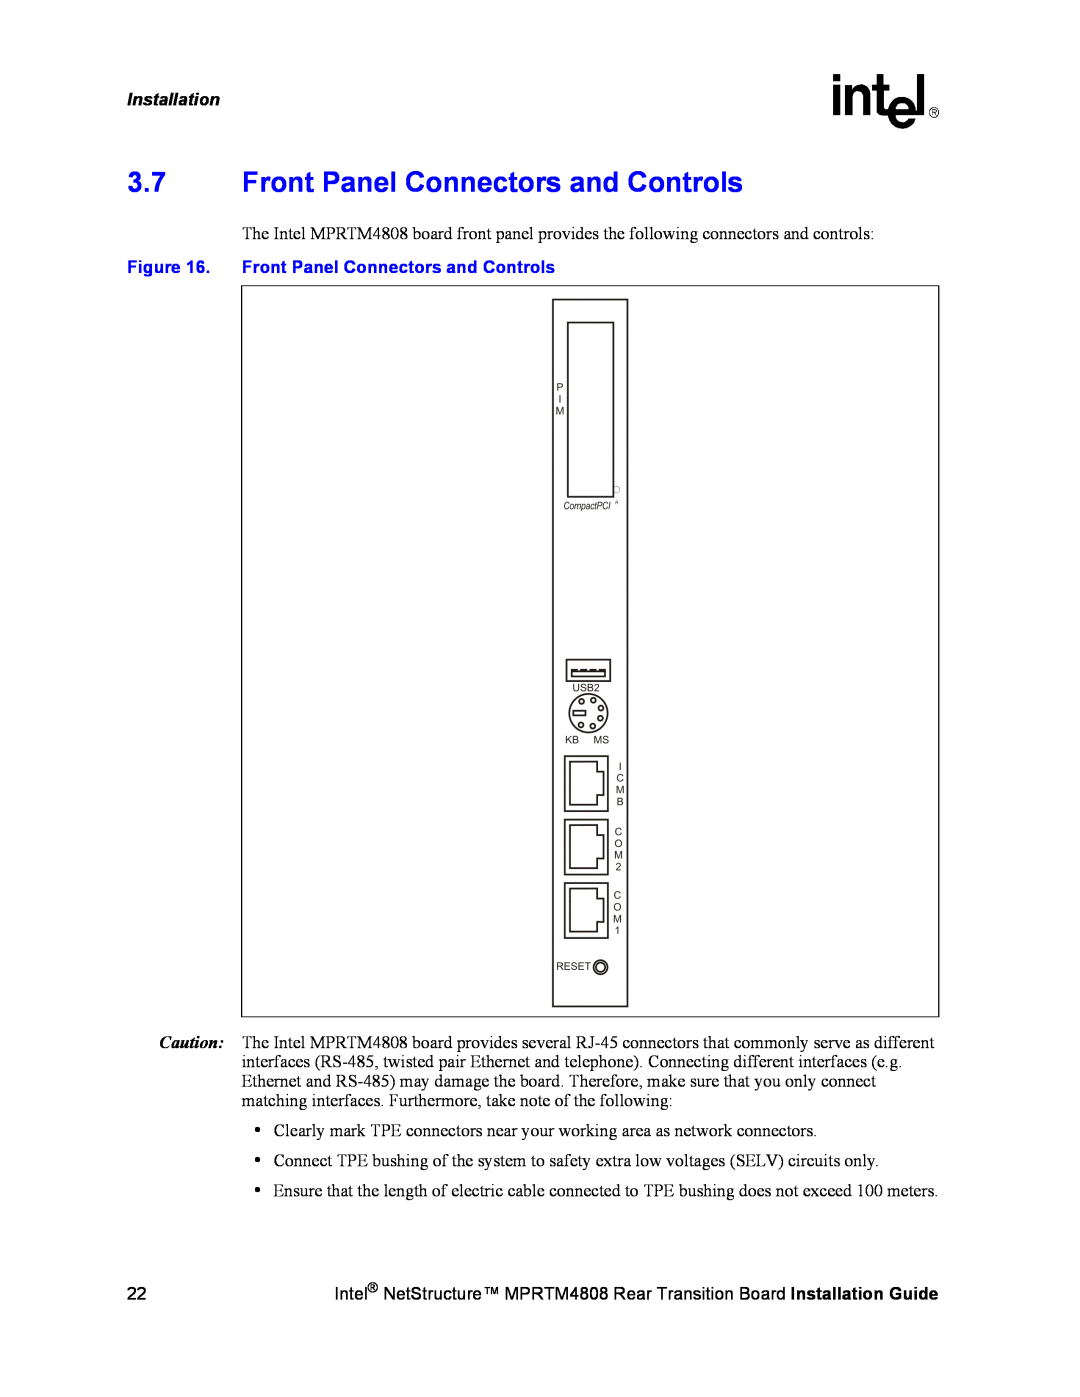 Intel MPRTM4808 manual 3.7Front Panel Connectors and Controls, Installation 